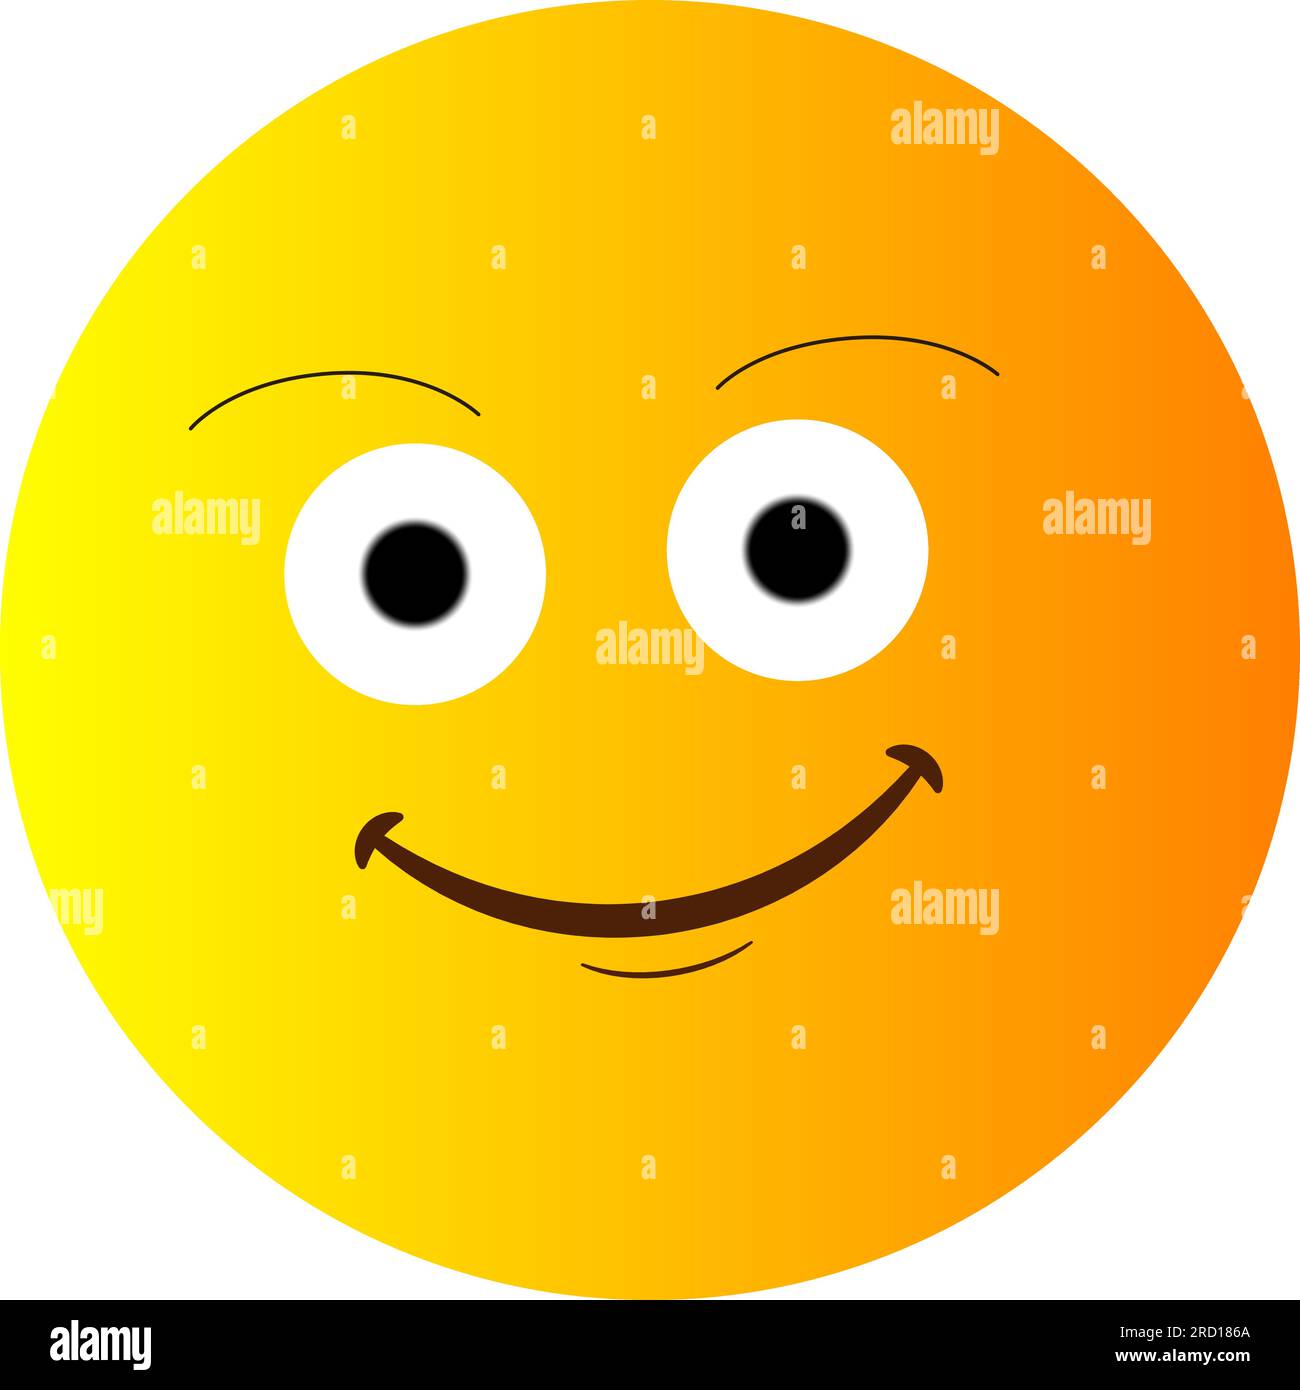 Yellow smiley face for your design. Happy smile card concept illustration. Сharacter for web or card design. Graphic element for background Stock Vector